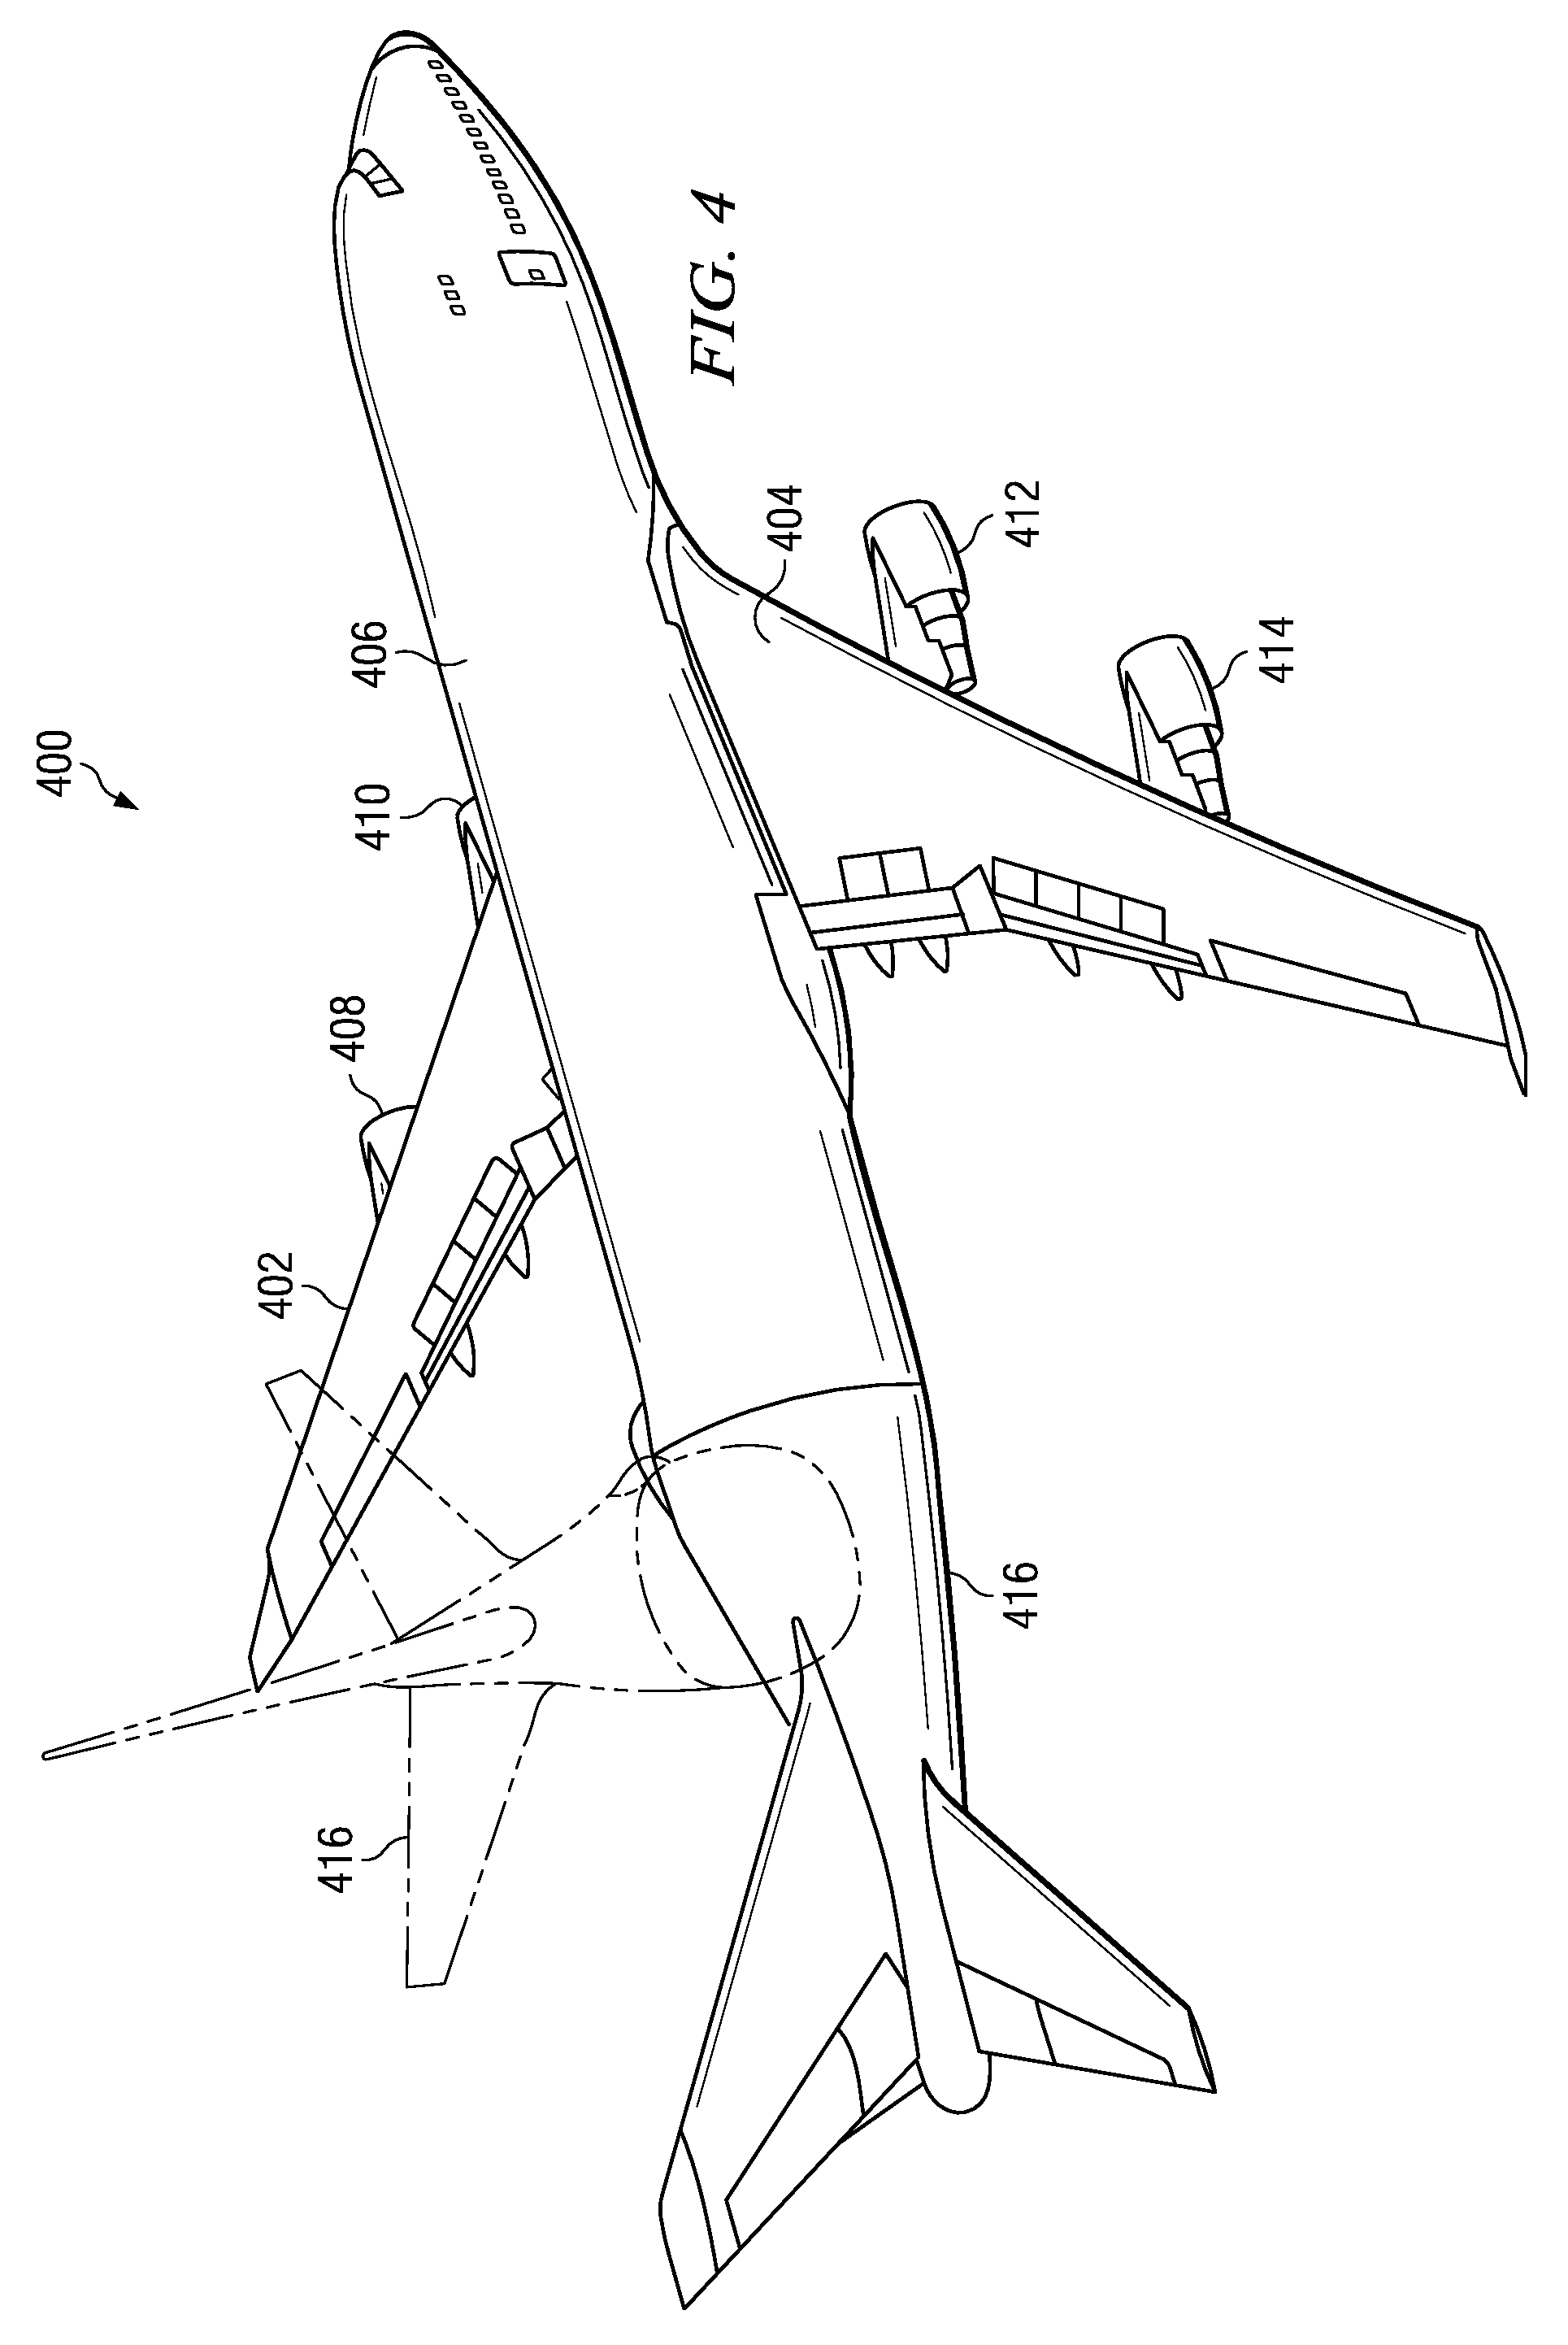 Method and apparatus for closing a swing tail on an aircraft